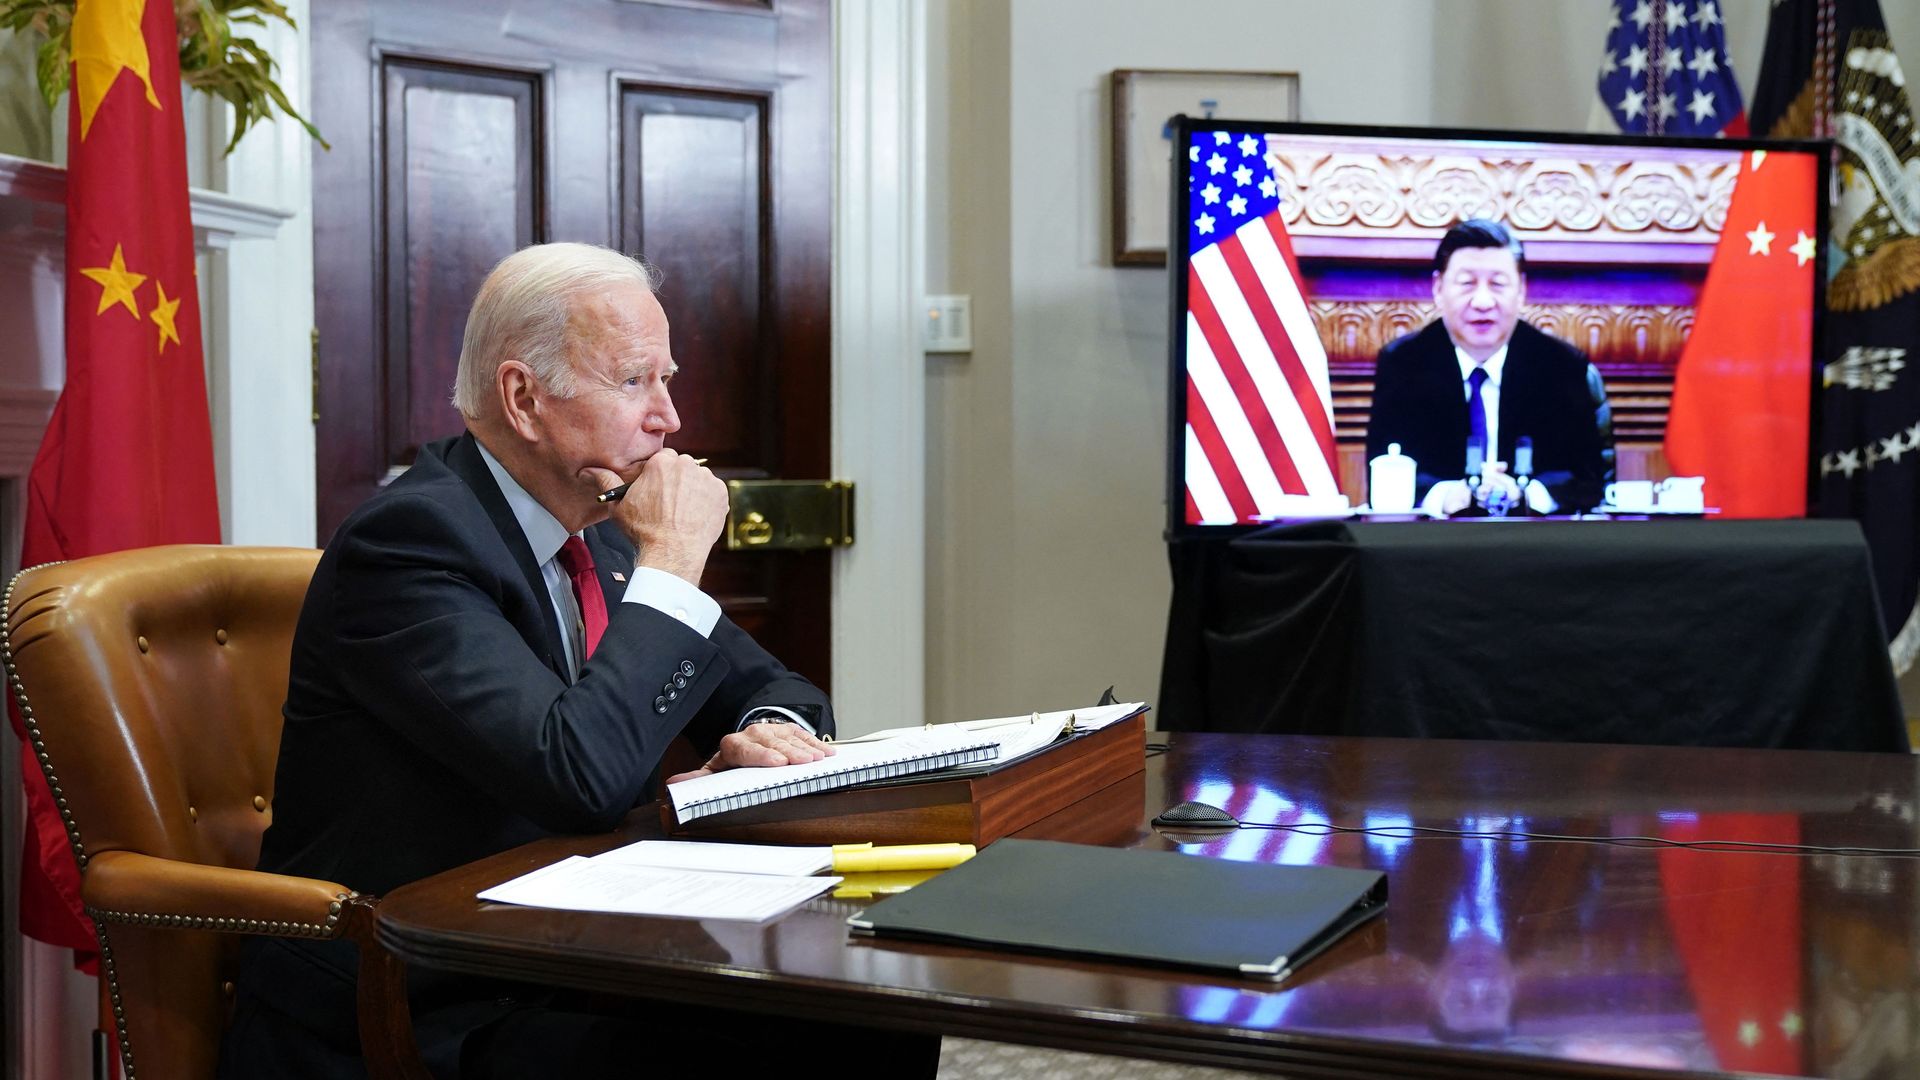 President Biden during a virtual summit with Chinese President Xi Jinping in November 2021.